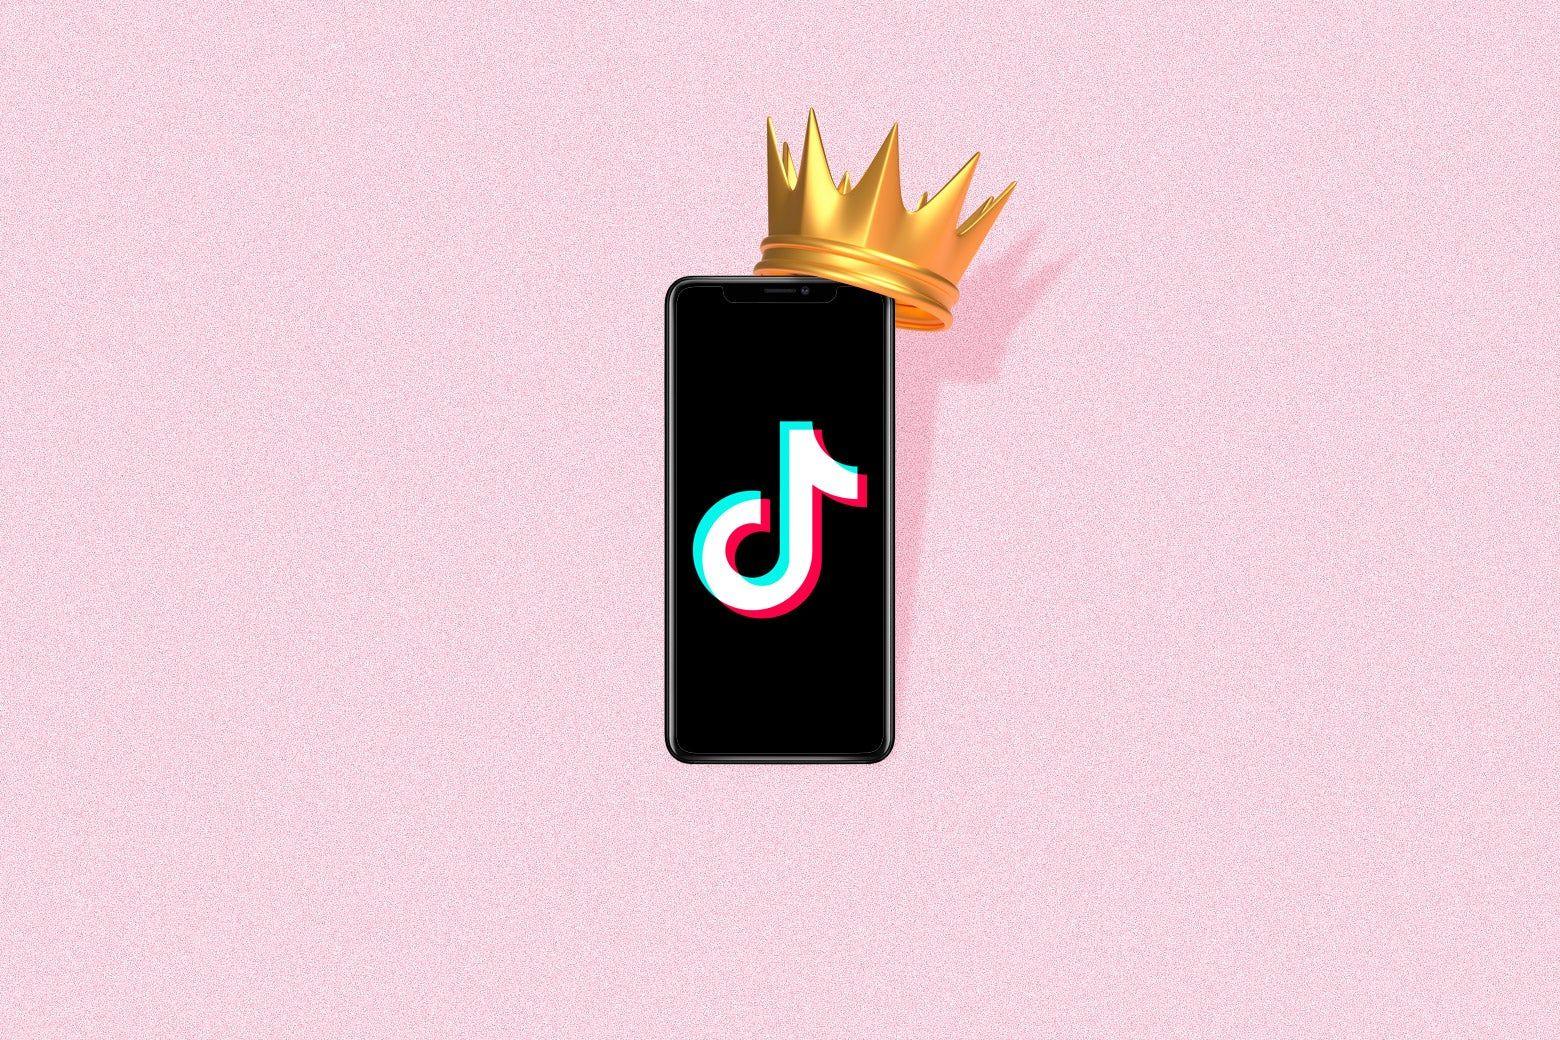 TikTok Logo - What is narcissism? TikTok presents an all-too-simple picture.